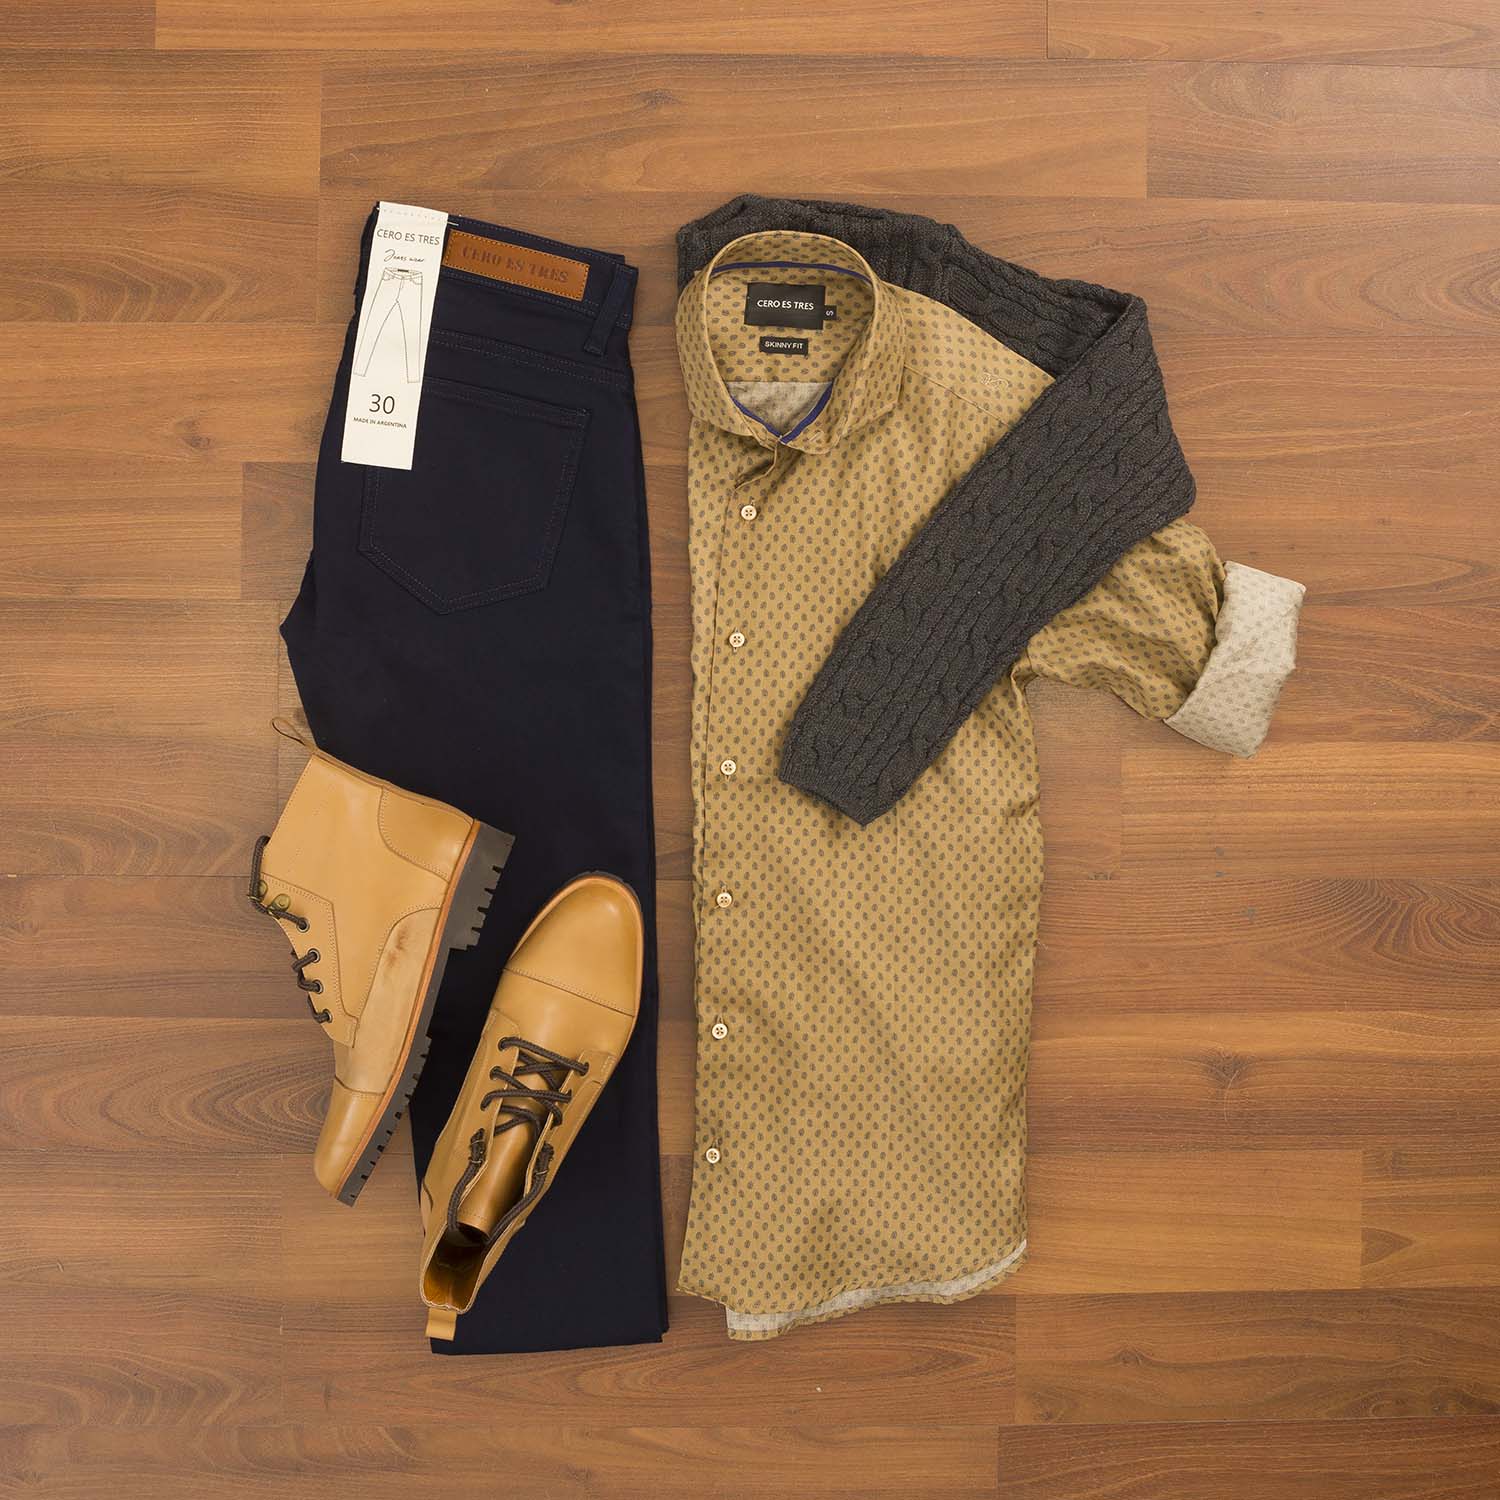 OUTFIT CERO 56